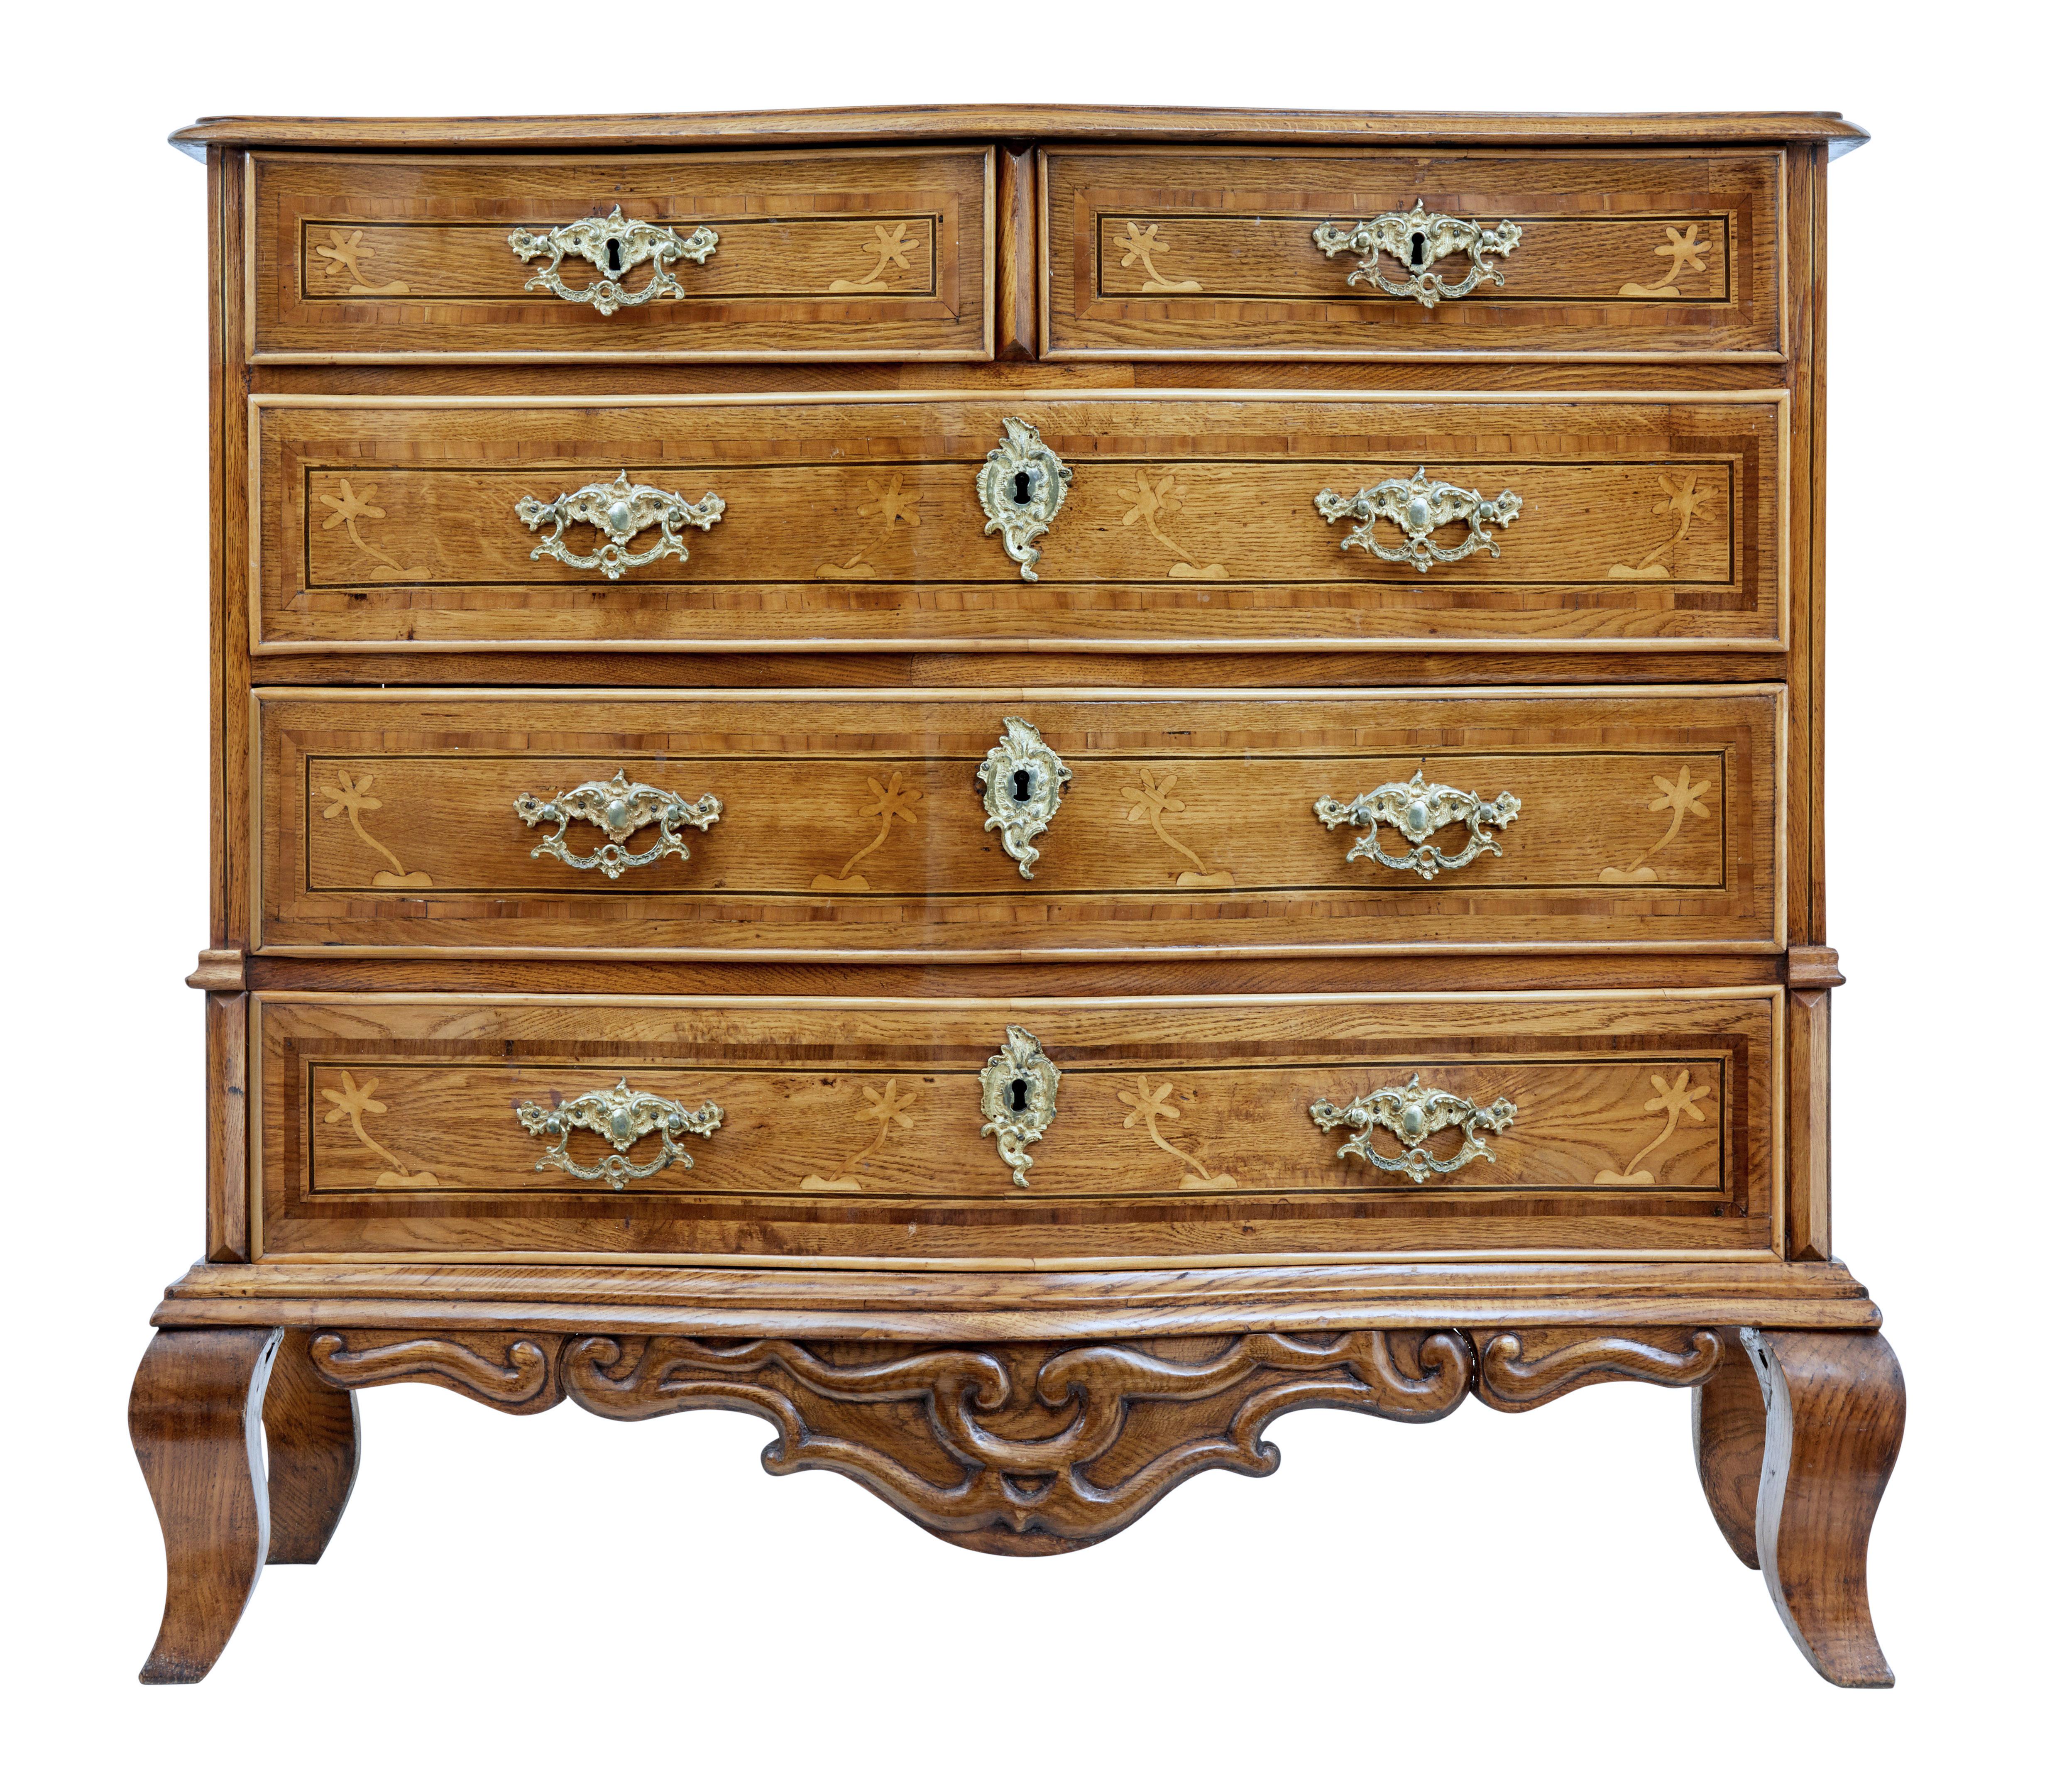 Early 19th century Swedish oak inlaid chest of drawers circa 1800.

Rare Swedish period commode with a serpentine shaped front. Cock beaded drawer edges, inlaid with walnut and satinwood and ebony stringing

Inlaid birch design on the sides.